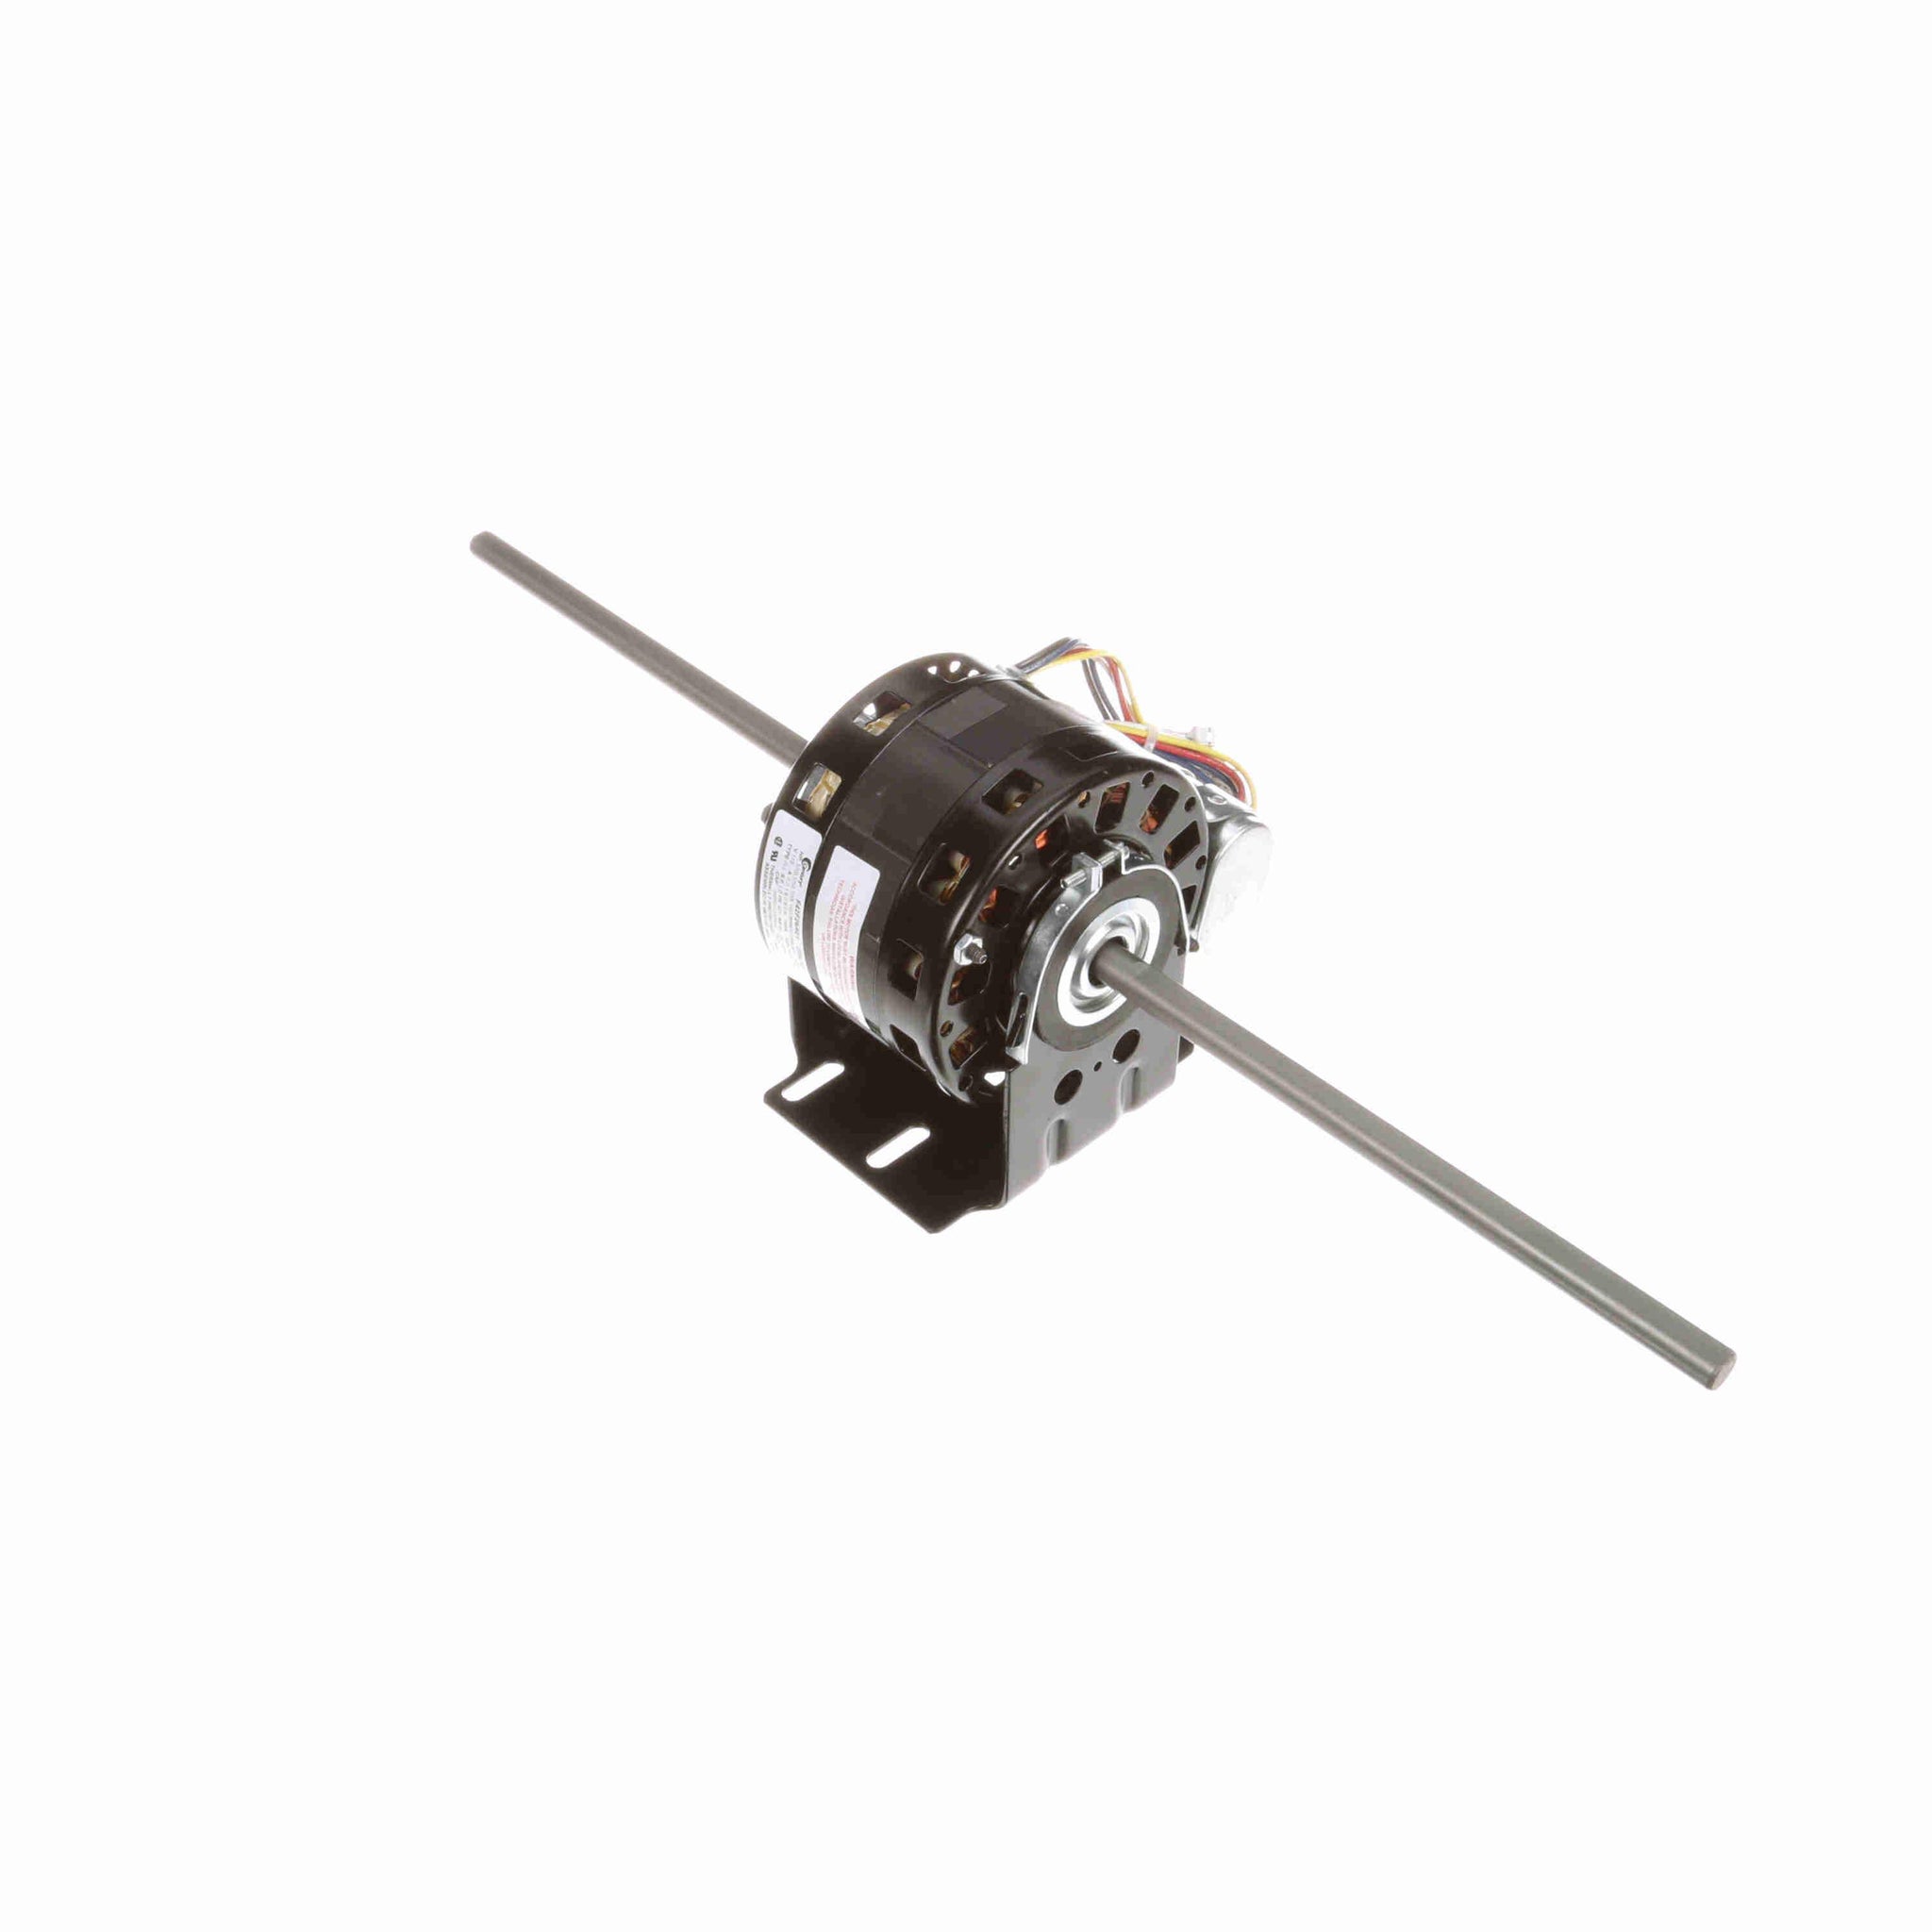 DBL6501V1 - 1/10-1/12-1/15-1/20 HP Fan Coil / Room Air Conditioner Motor, 1075 RPM, 4 Speed, 115 Volts, 42 Frame, OAO - Hardware & Moreee